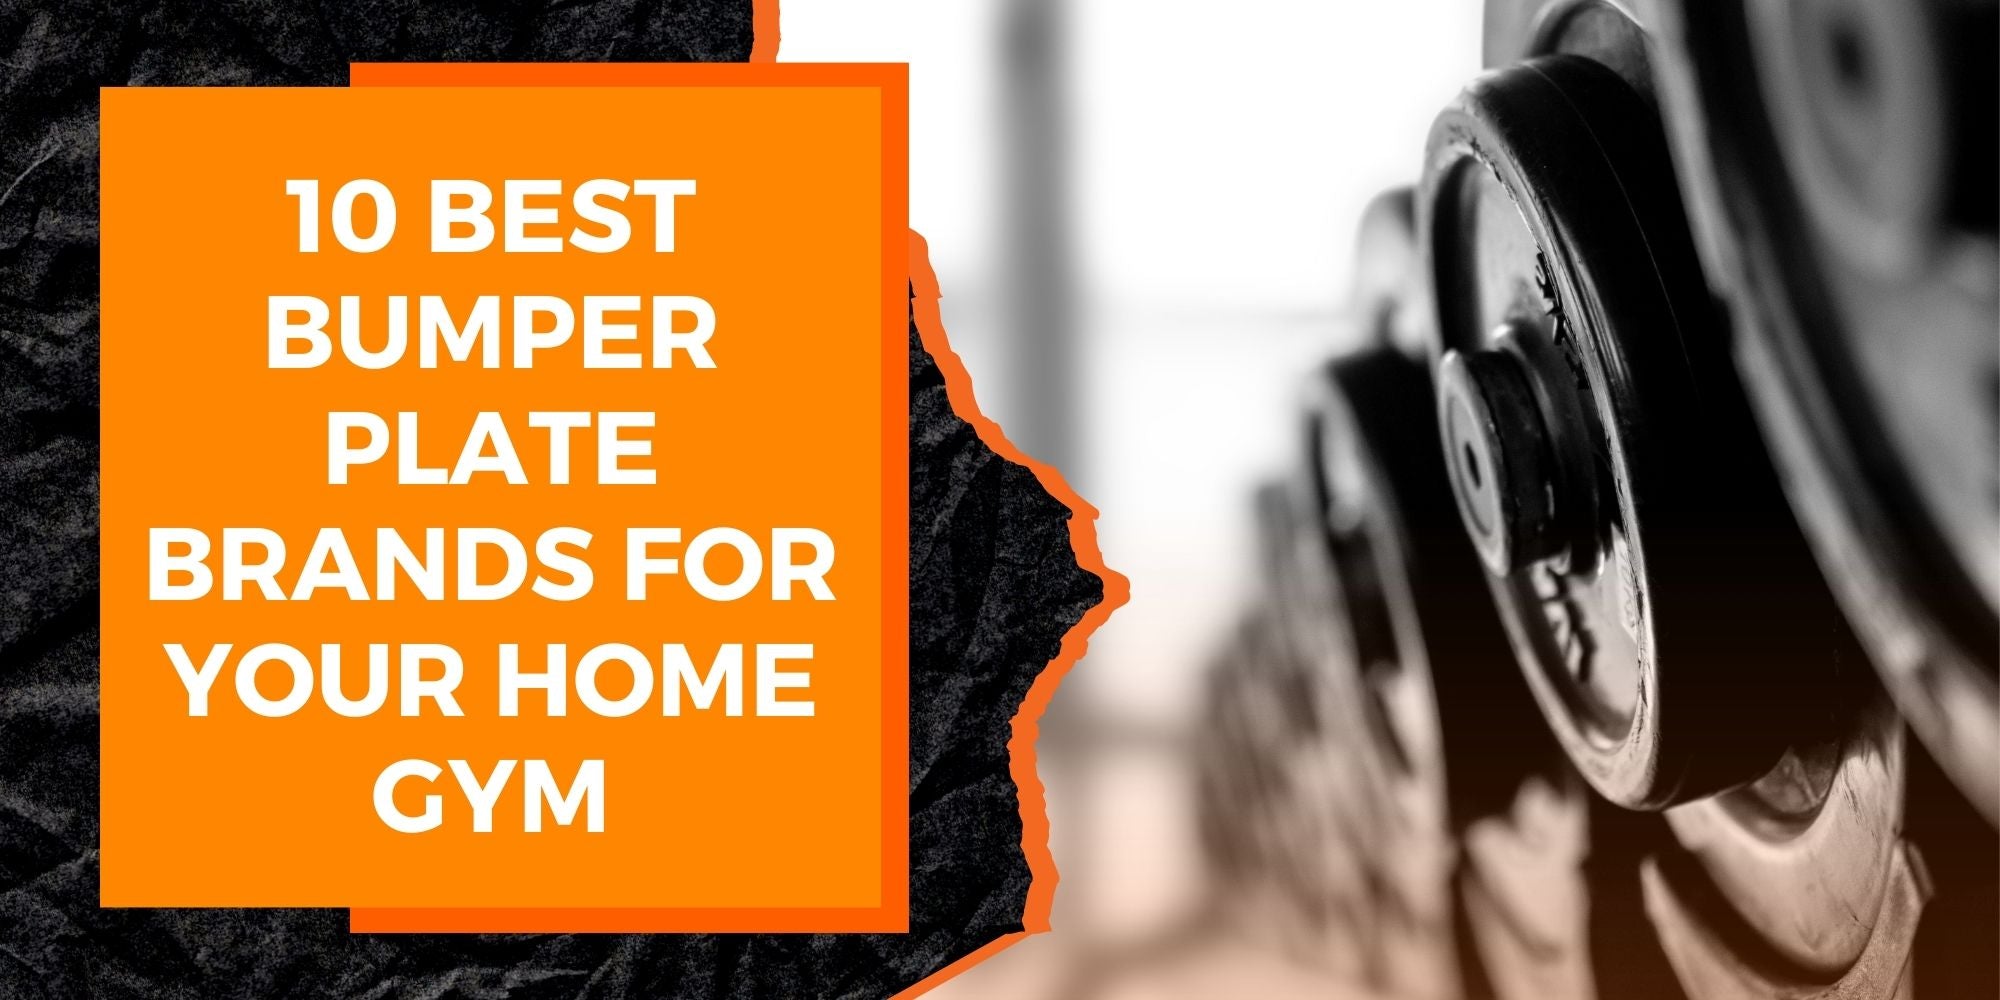 10 Best Bumper Plate Brands for Your Home Gym